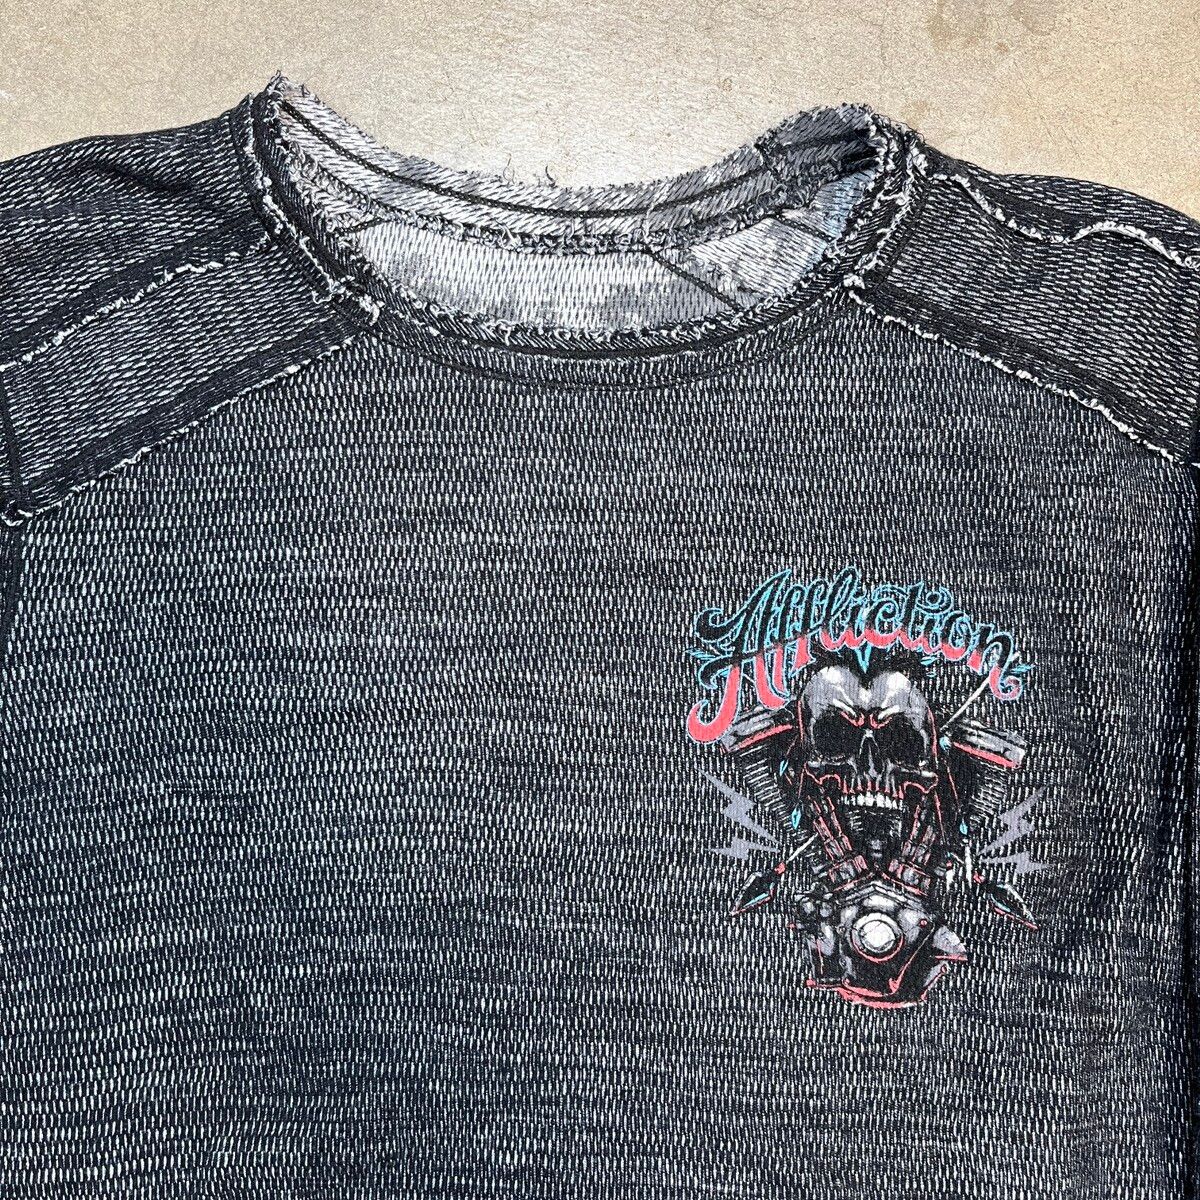 Vintage Affliction Thermal Reversible Skull Indian American Customs Size US L / EU 52-54 / 3 - 5 Thumbnail